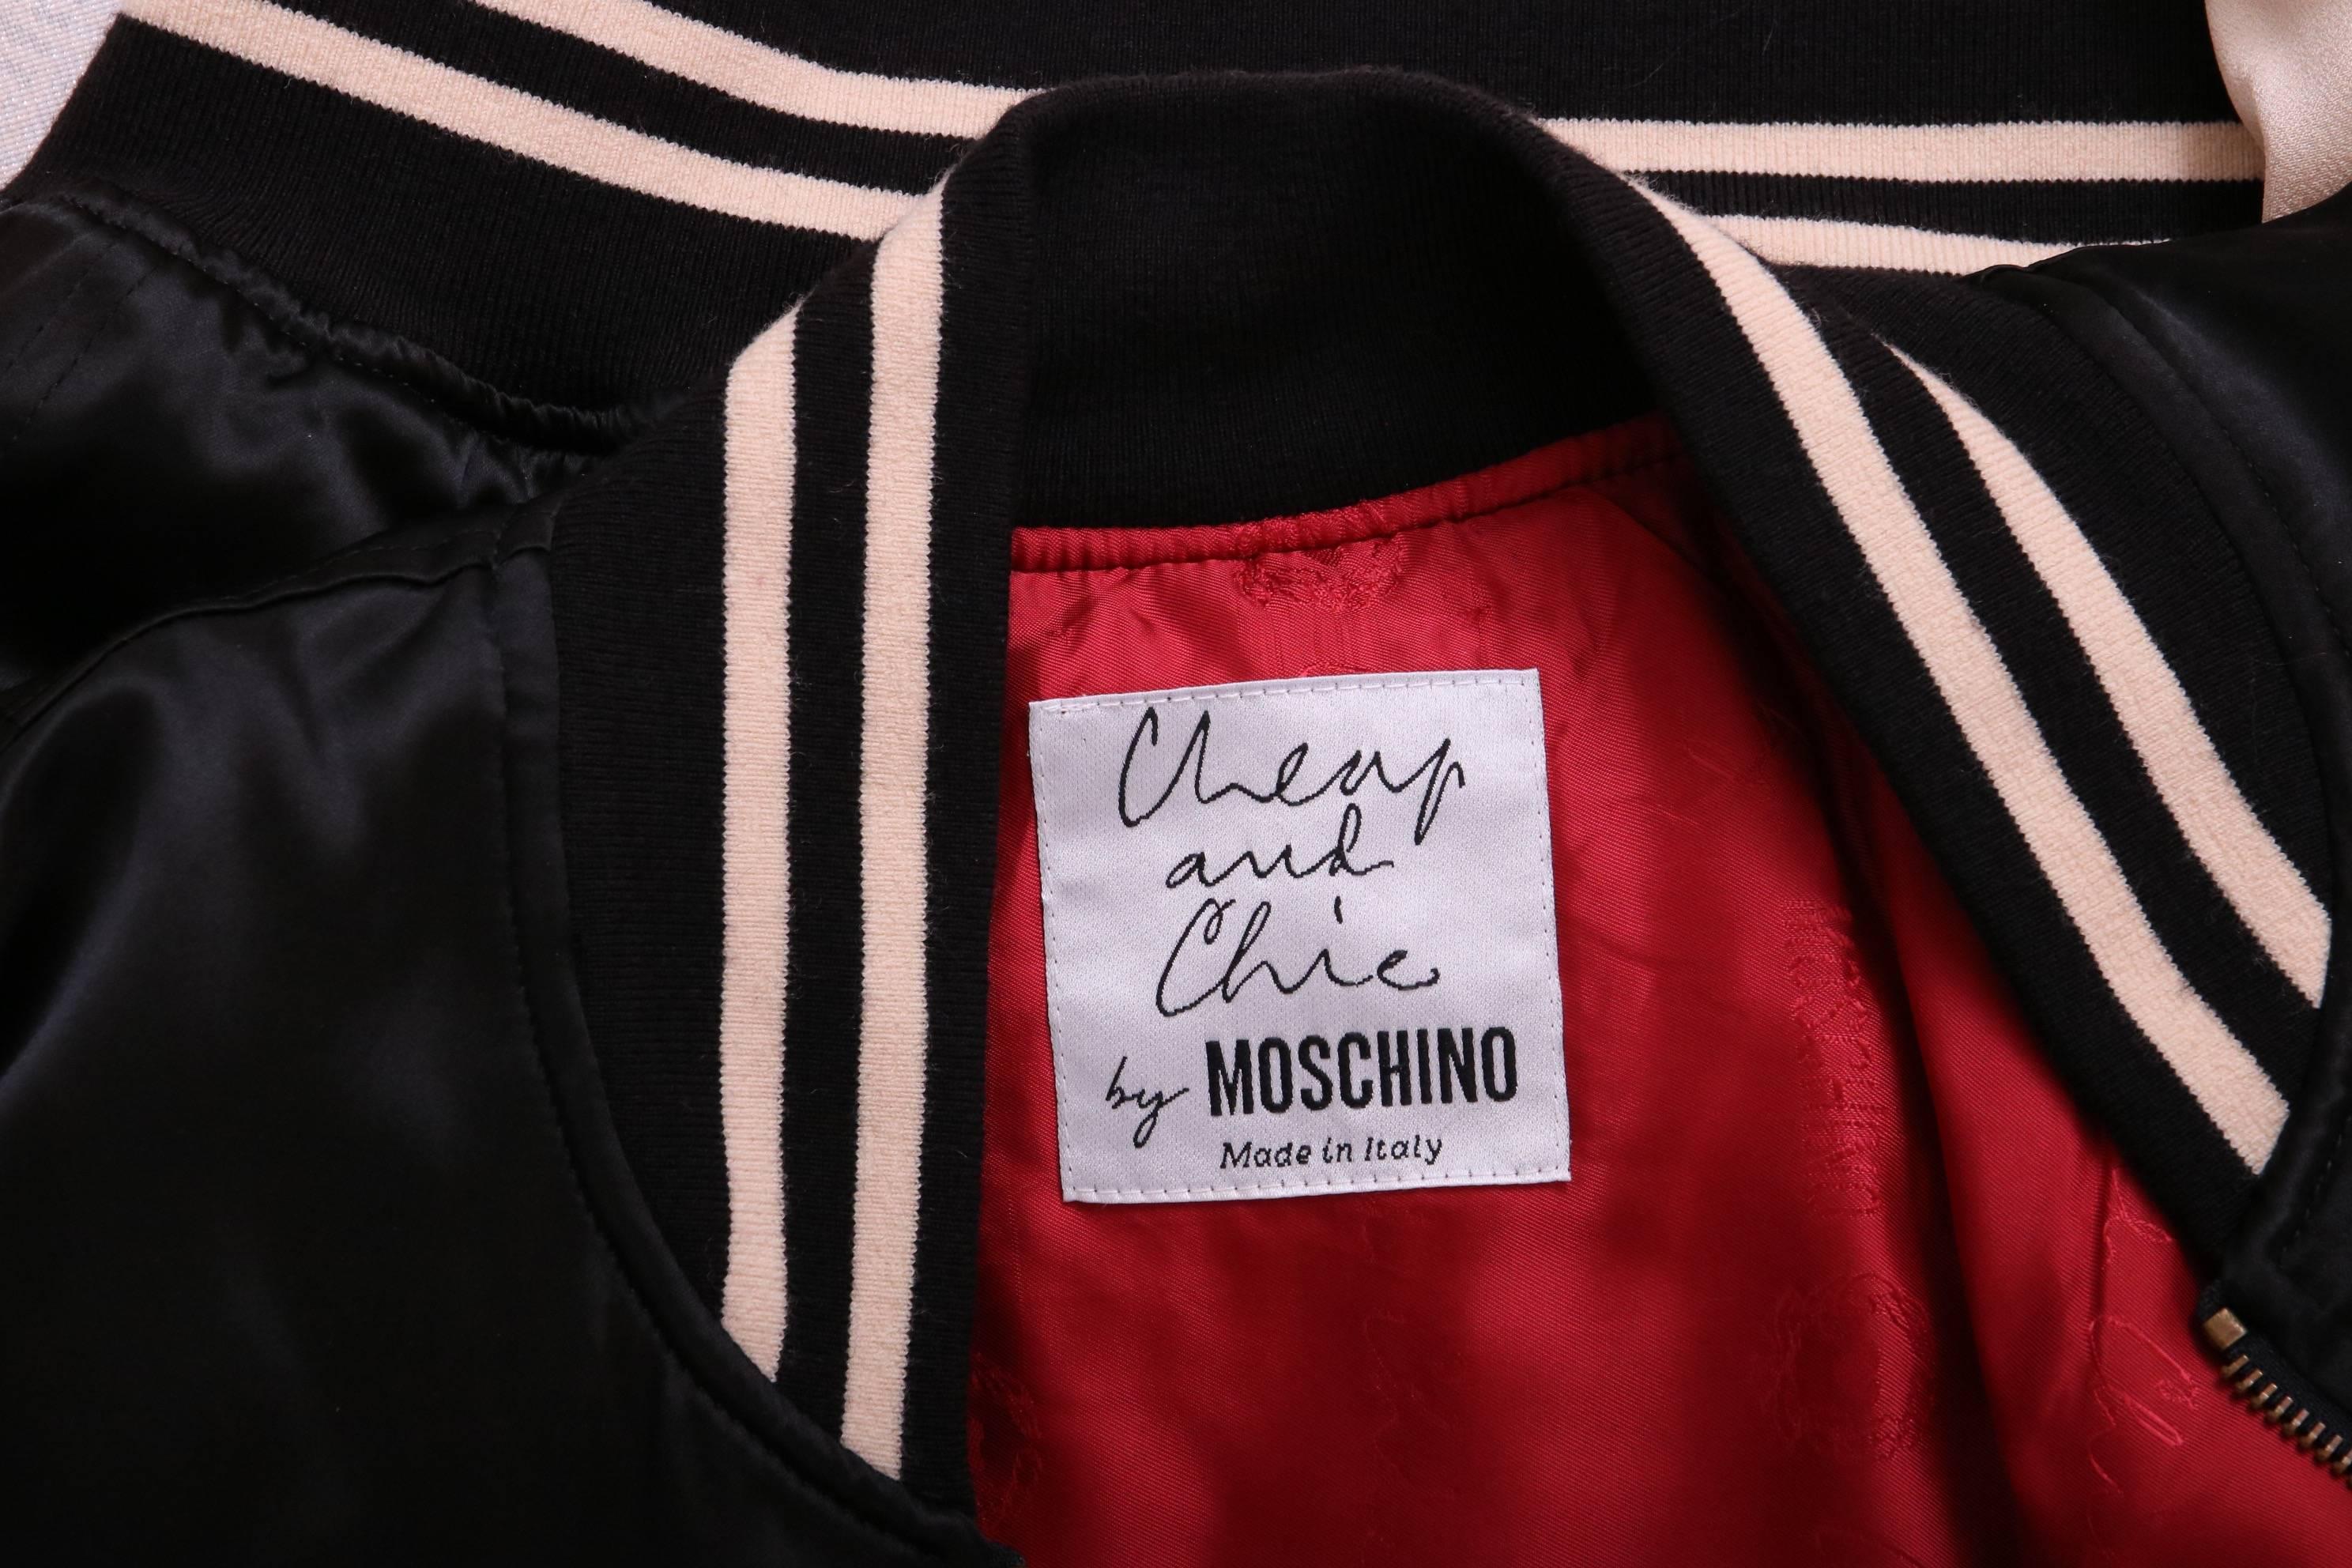 Vintage Moschino Cheap & Chic 